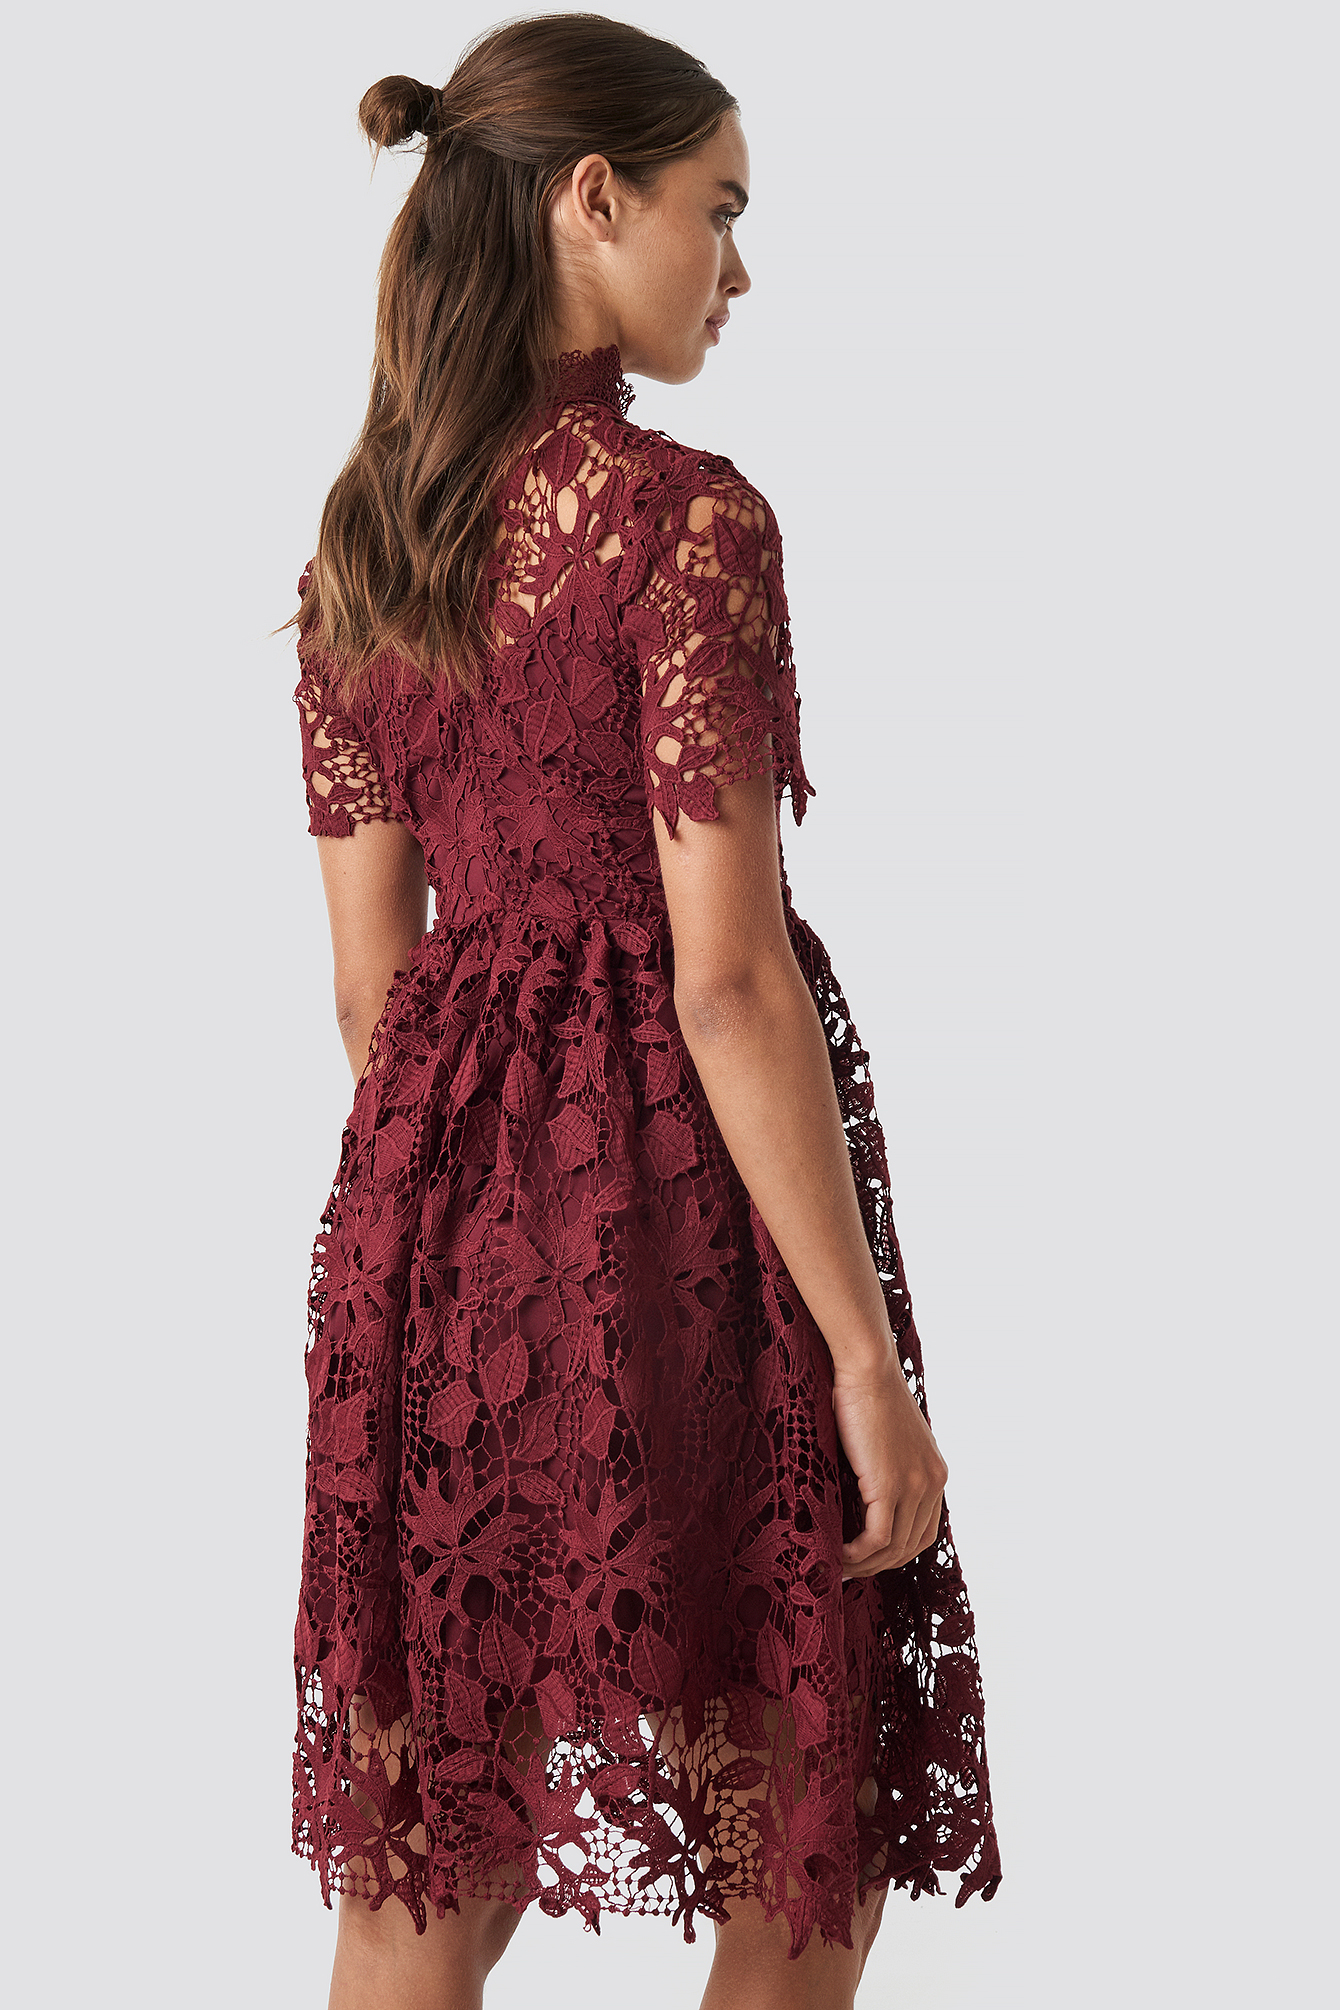 Rustic Red High Neck Short Sleeve Lace Dress